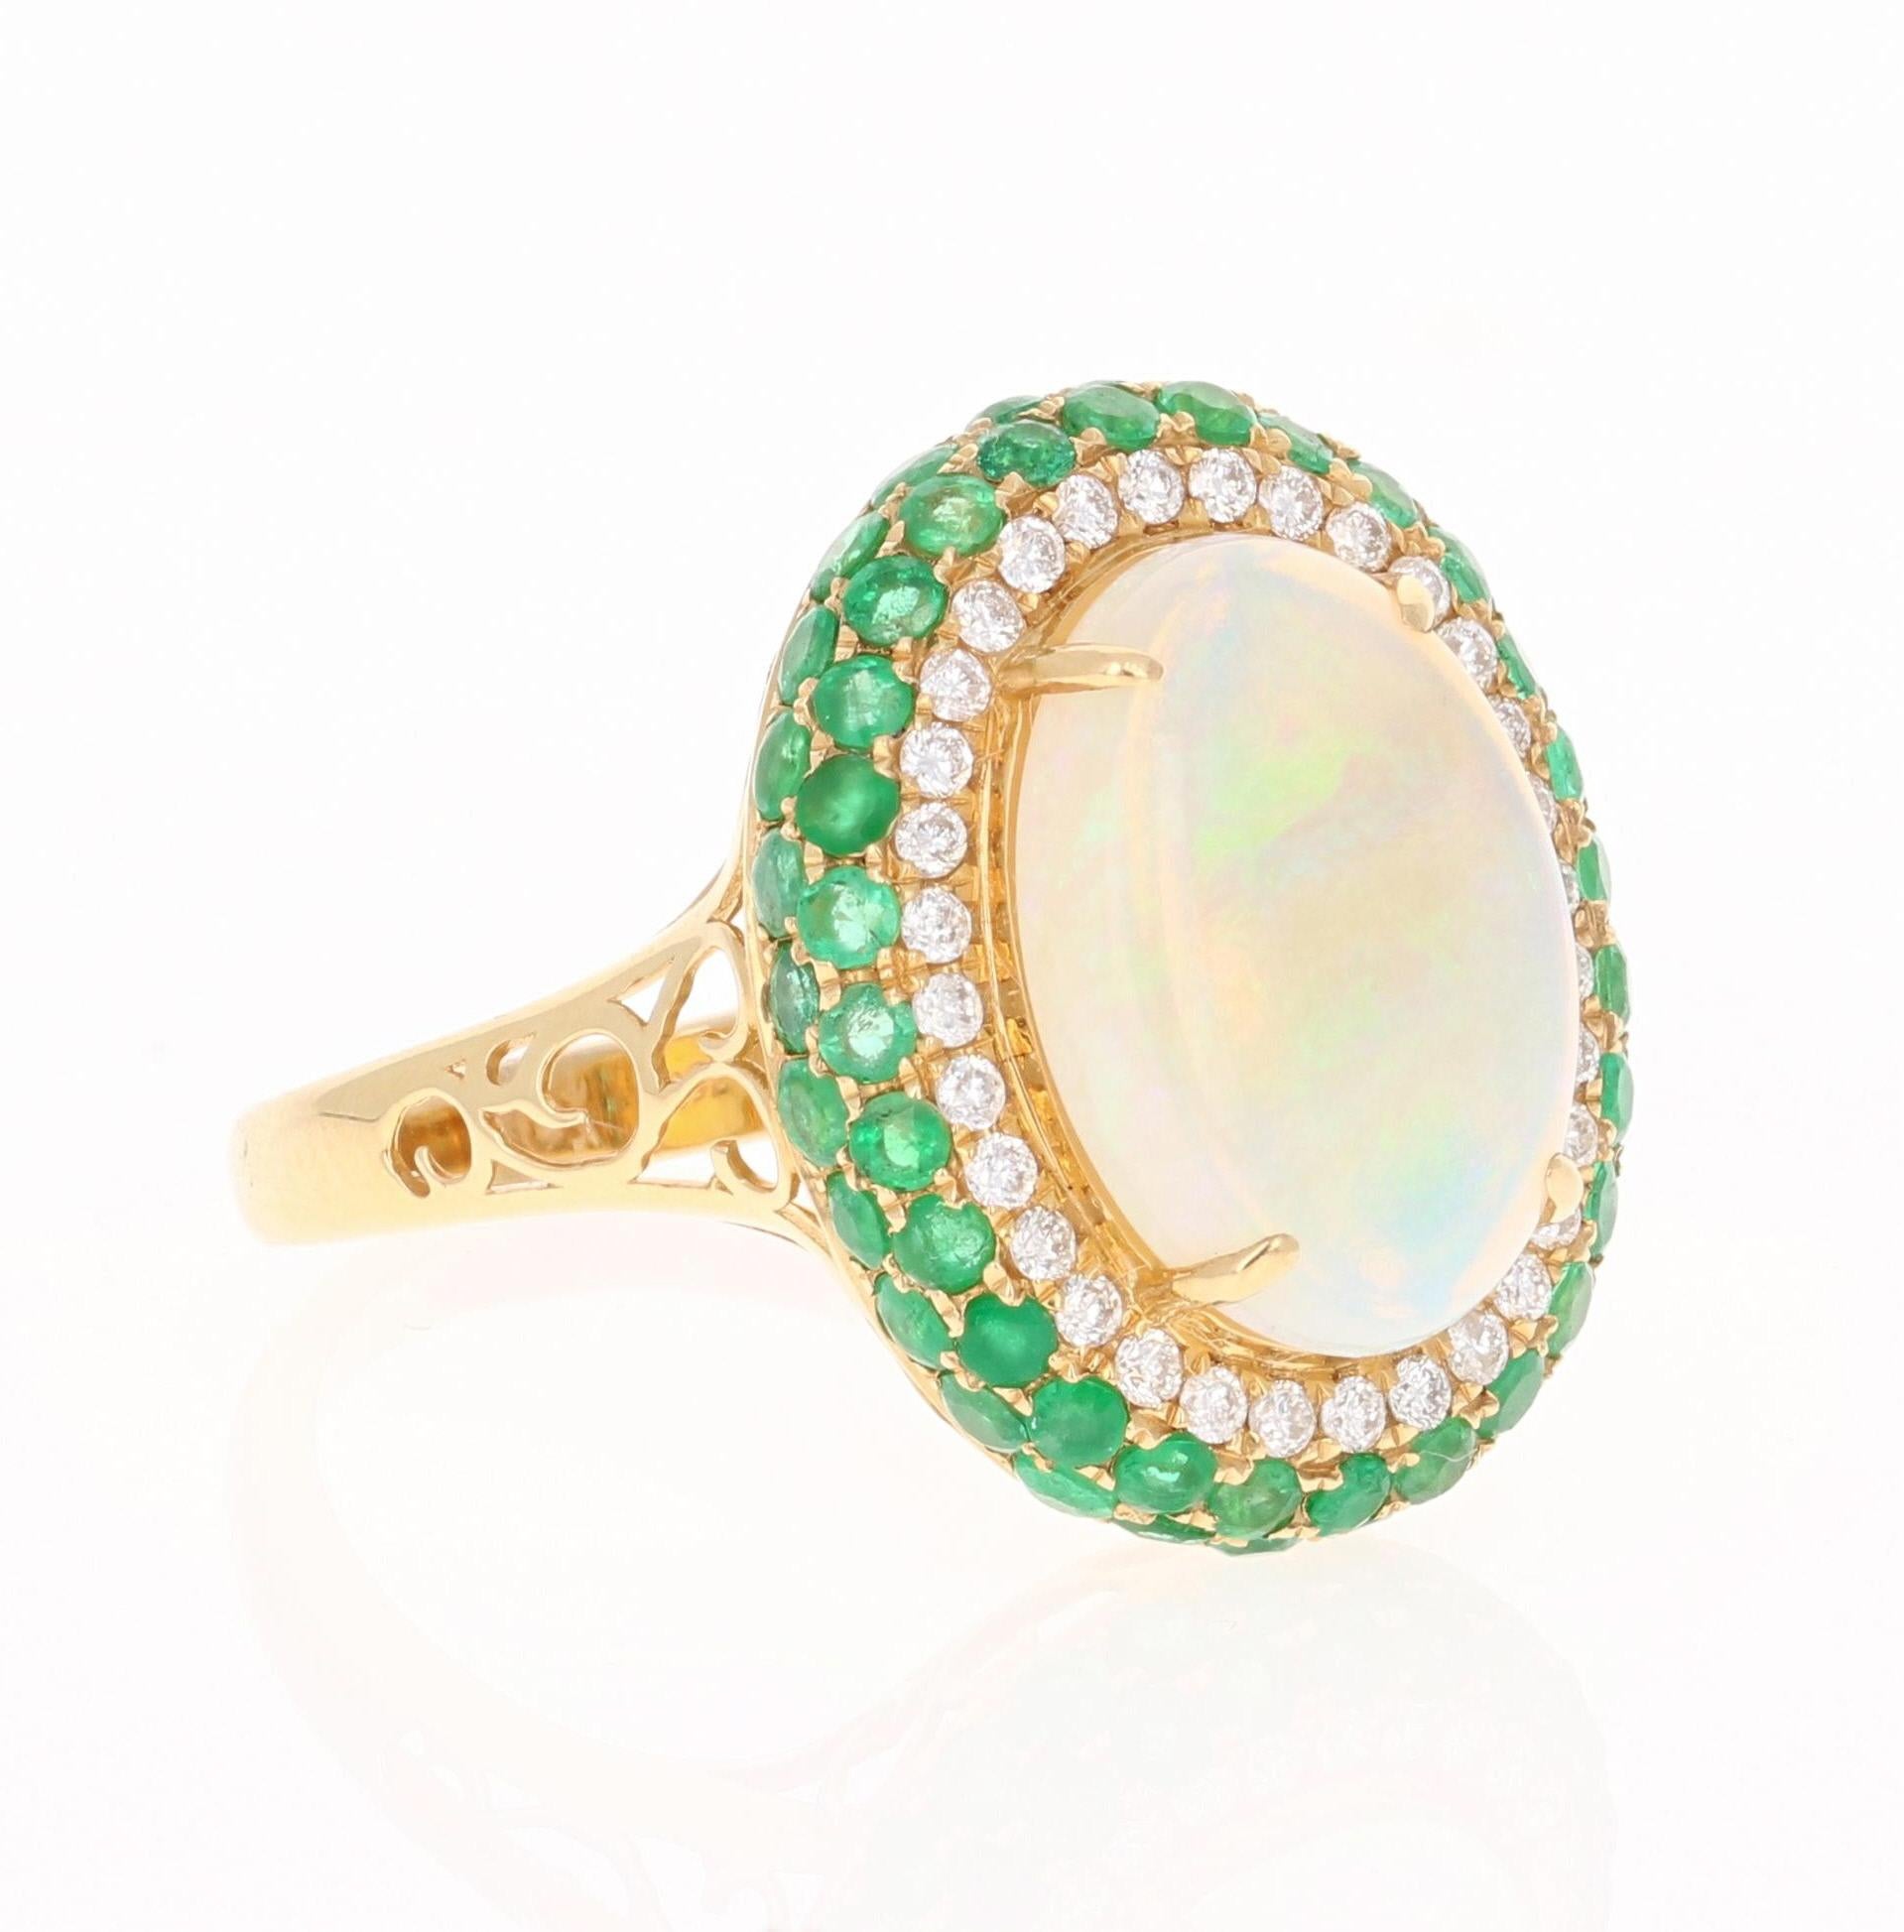 This stunning ring has an Opal that weighs 3.11 Carats with Emeralds that weigh 1.42 Carats and Diamonds that weigh 0.29 Carats. The total carat weight of the ring is 4.82 Carats. 

The ring is beautifully set in 18 Karat Yellow Gold and weighs